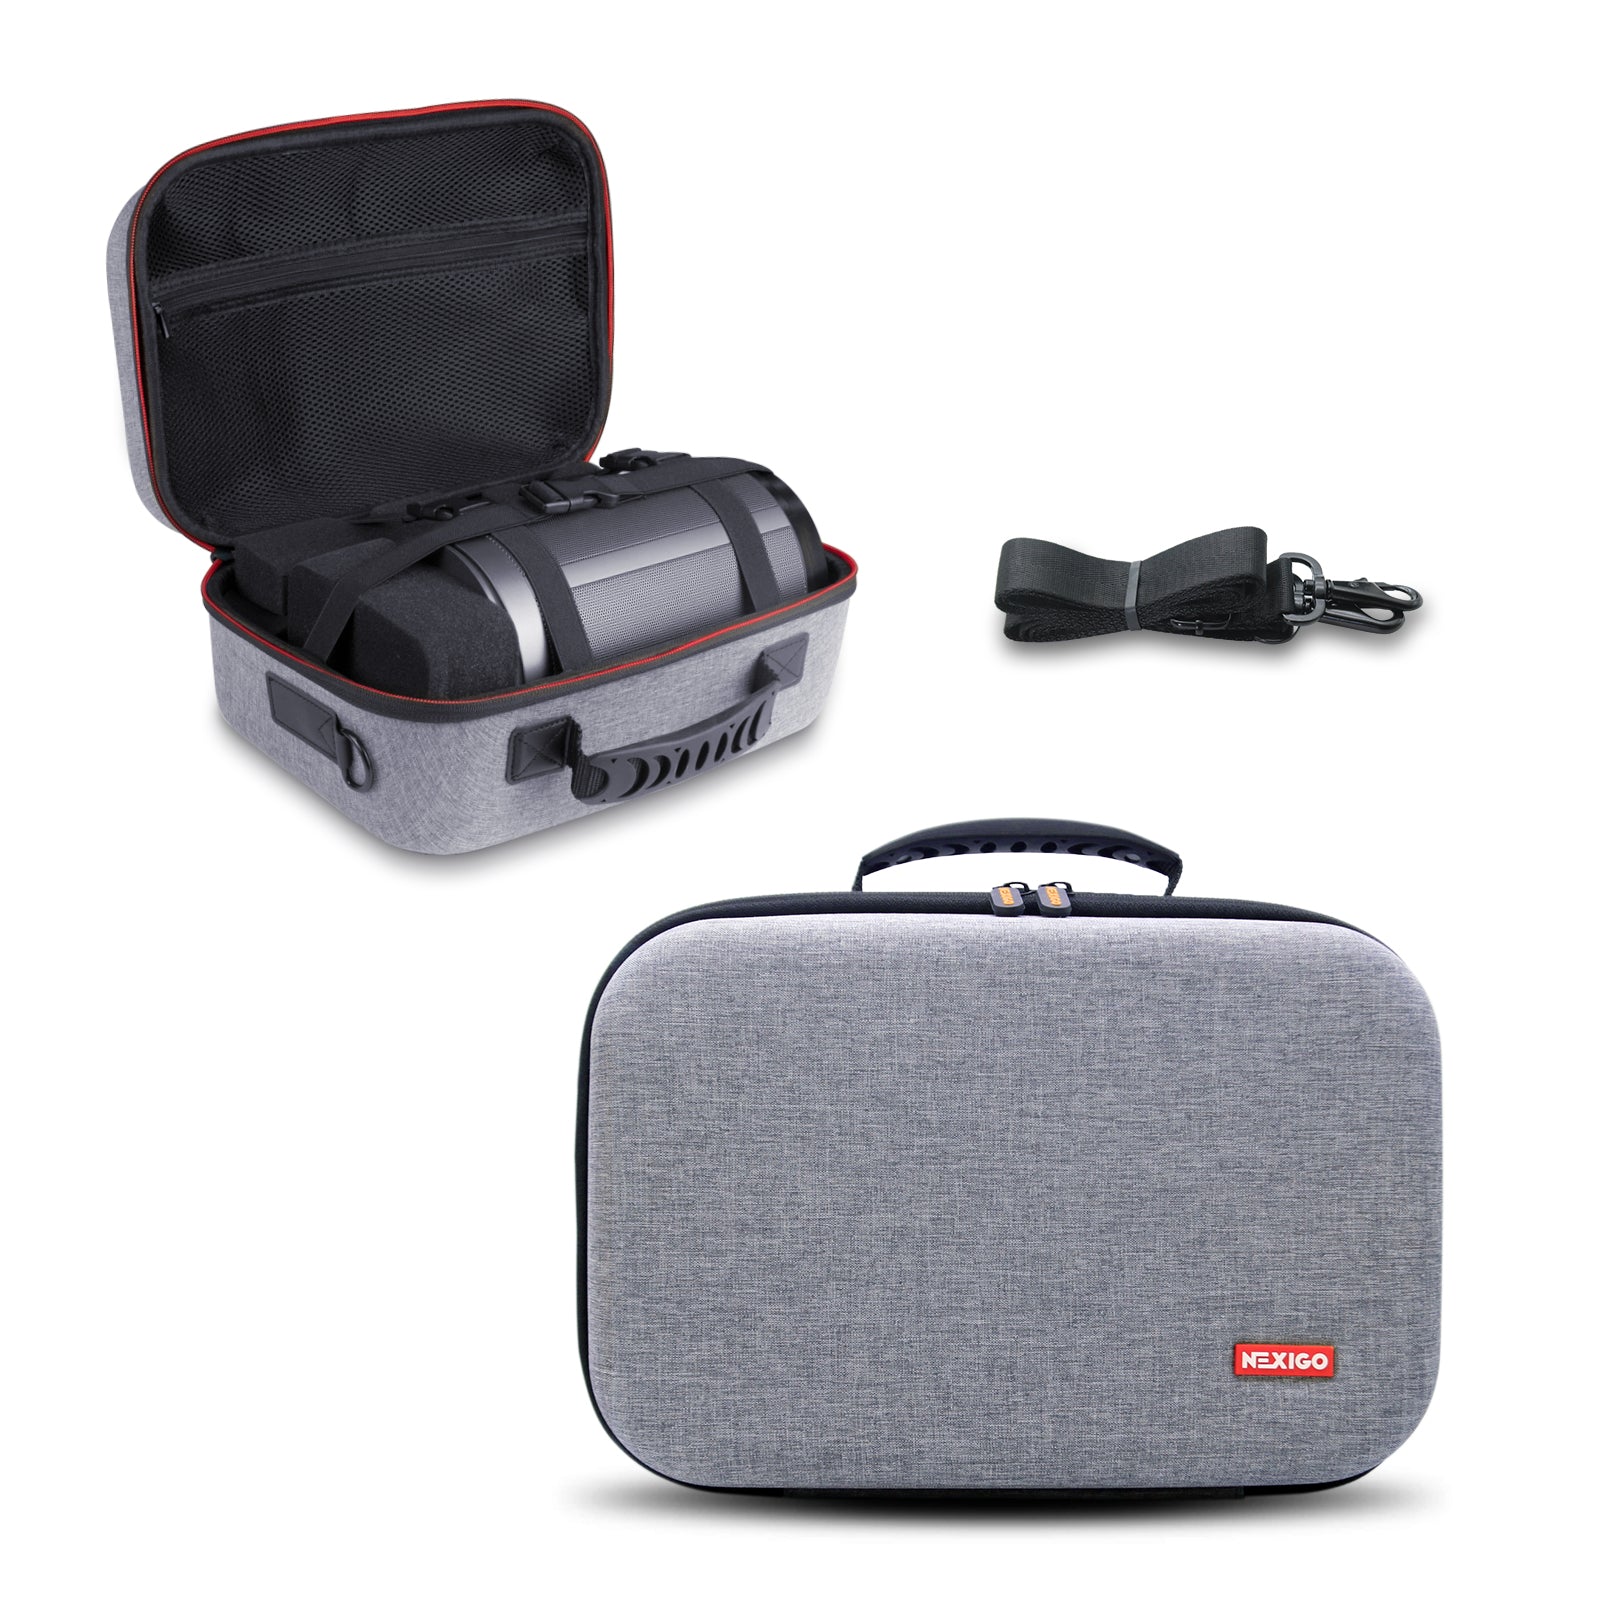 2 grey travel cases for conference cameras with carrying belts. 